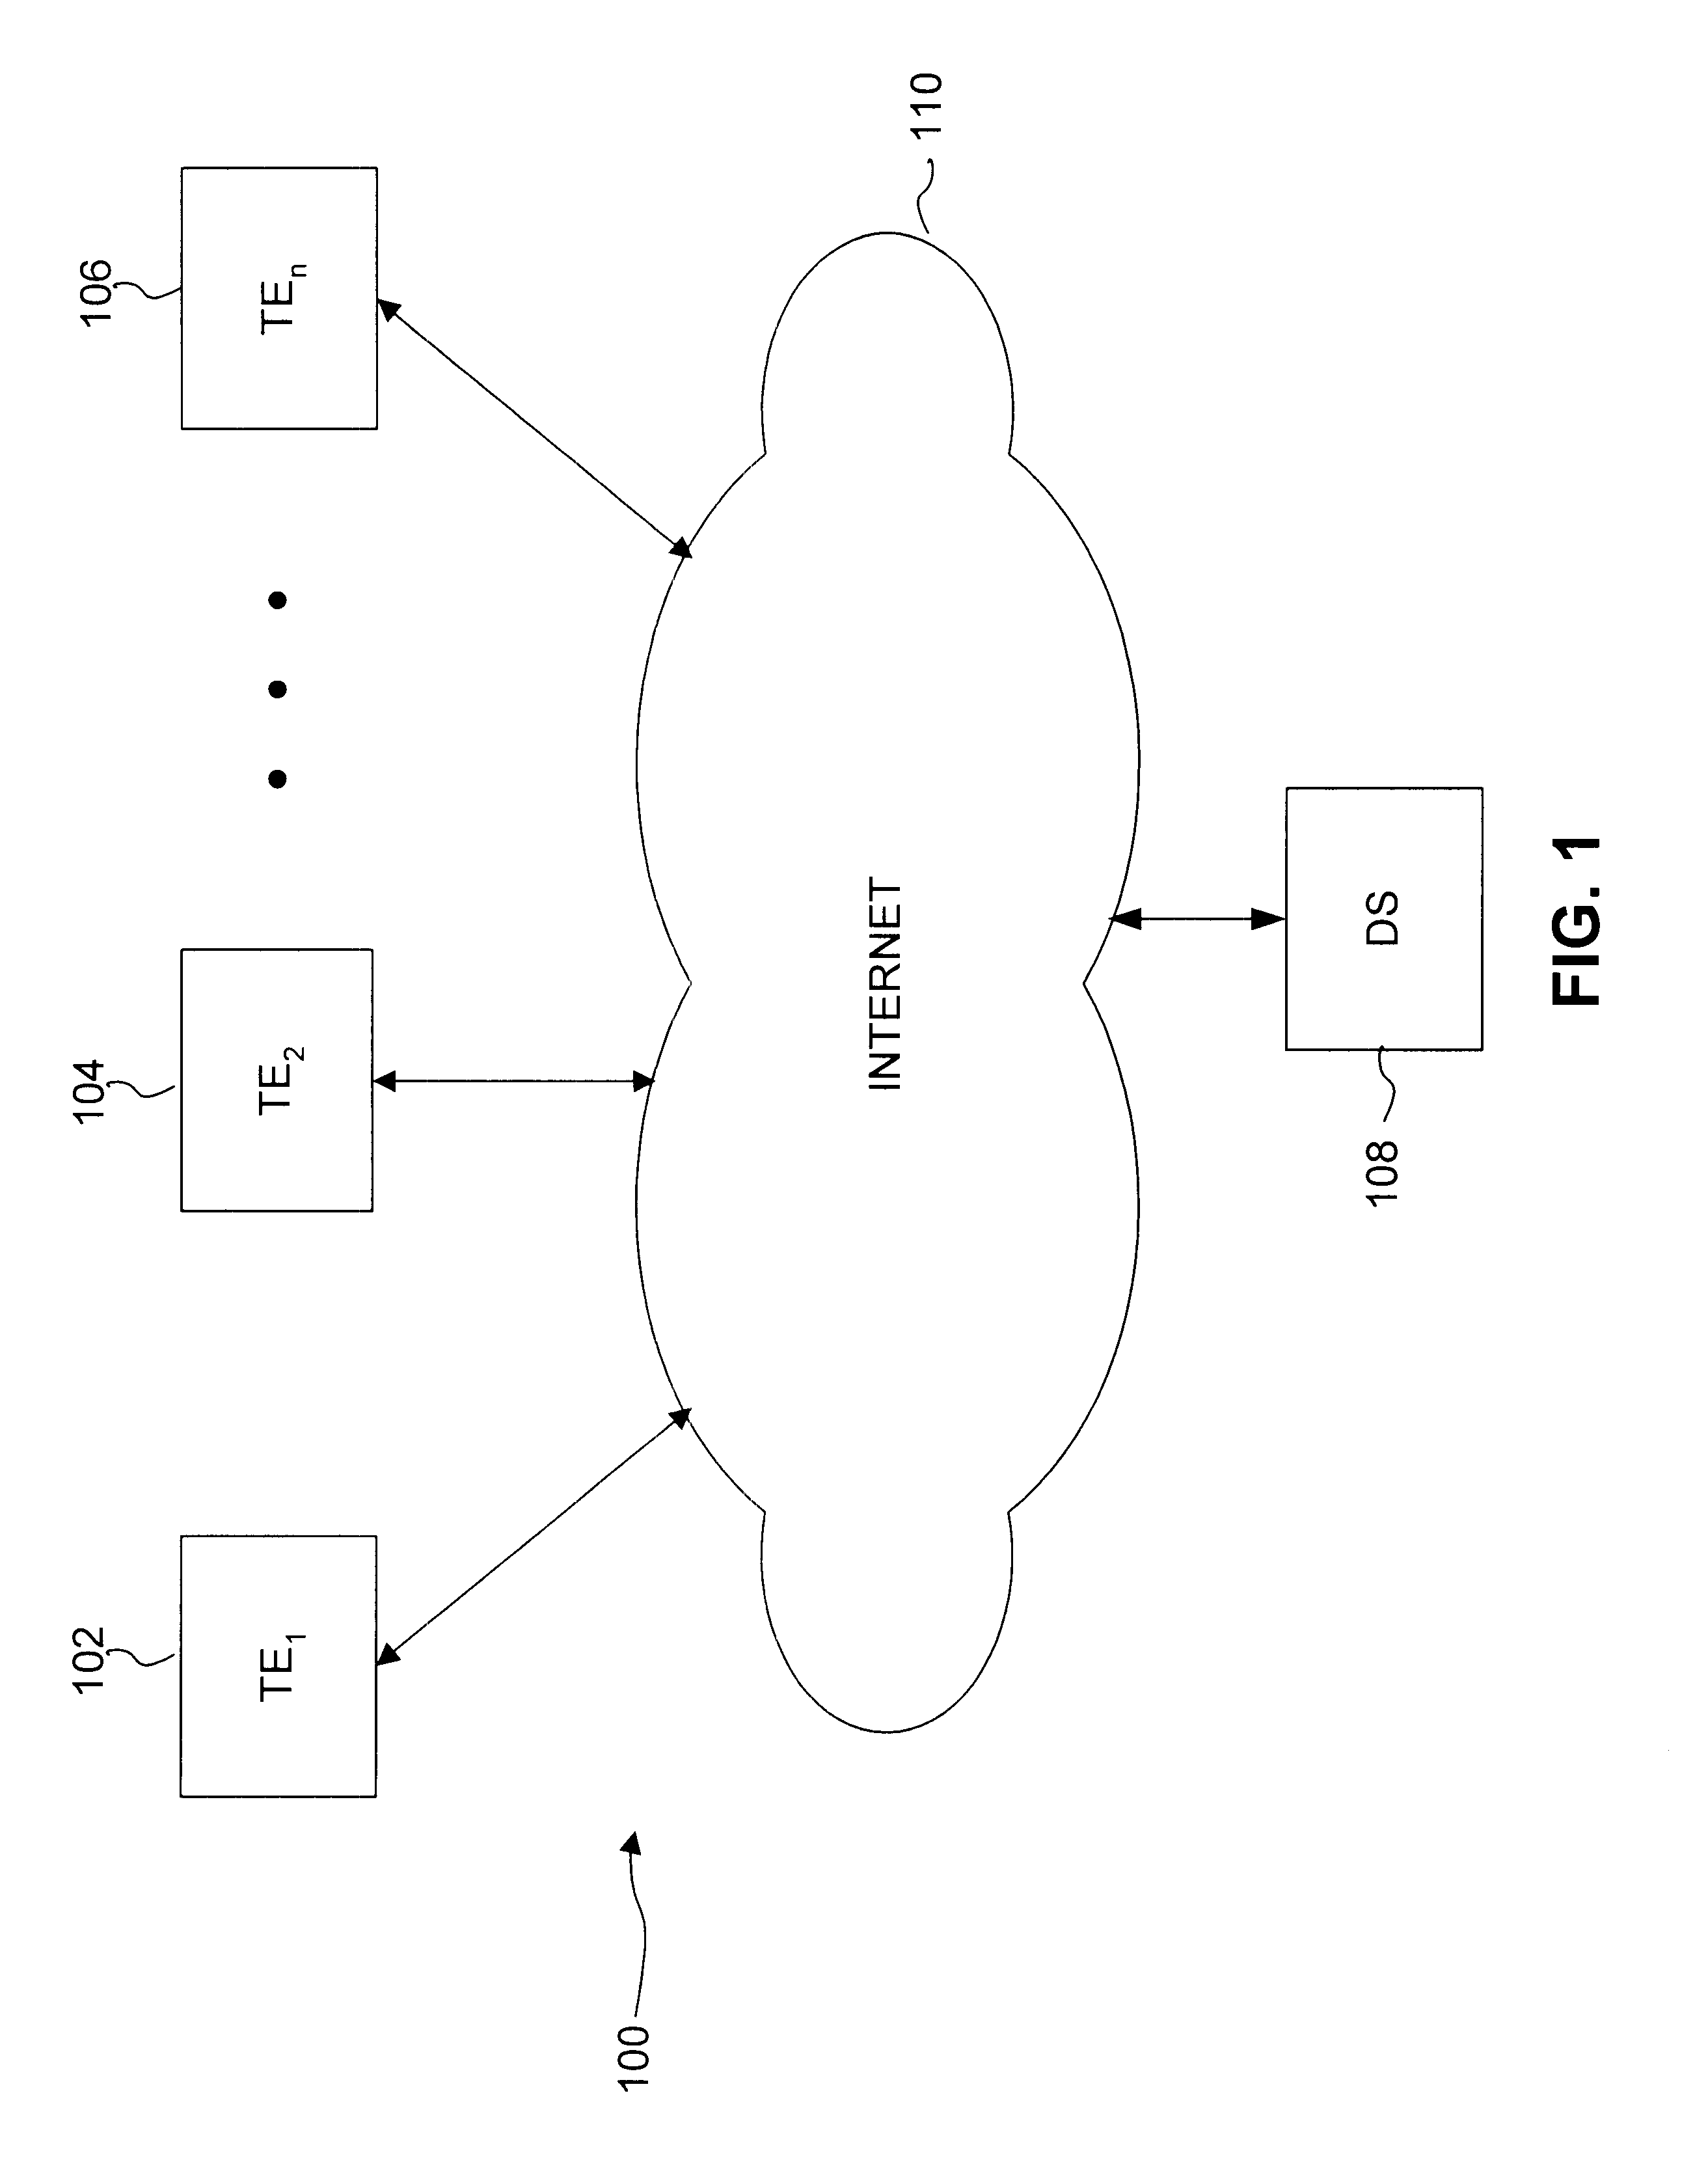 System, method and computer program product for diagnostic supervision of internet connections